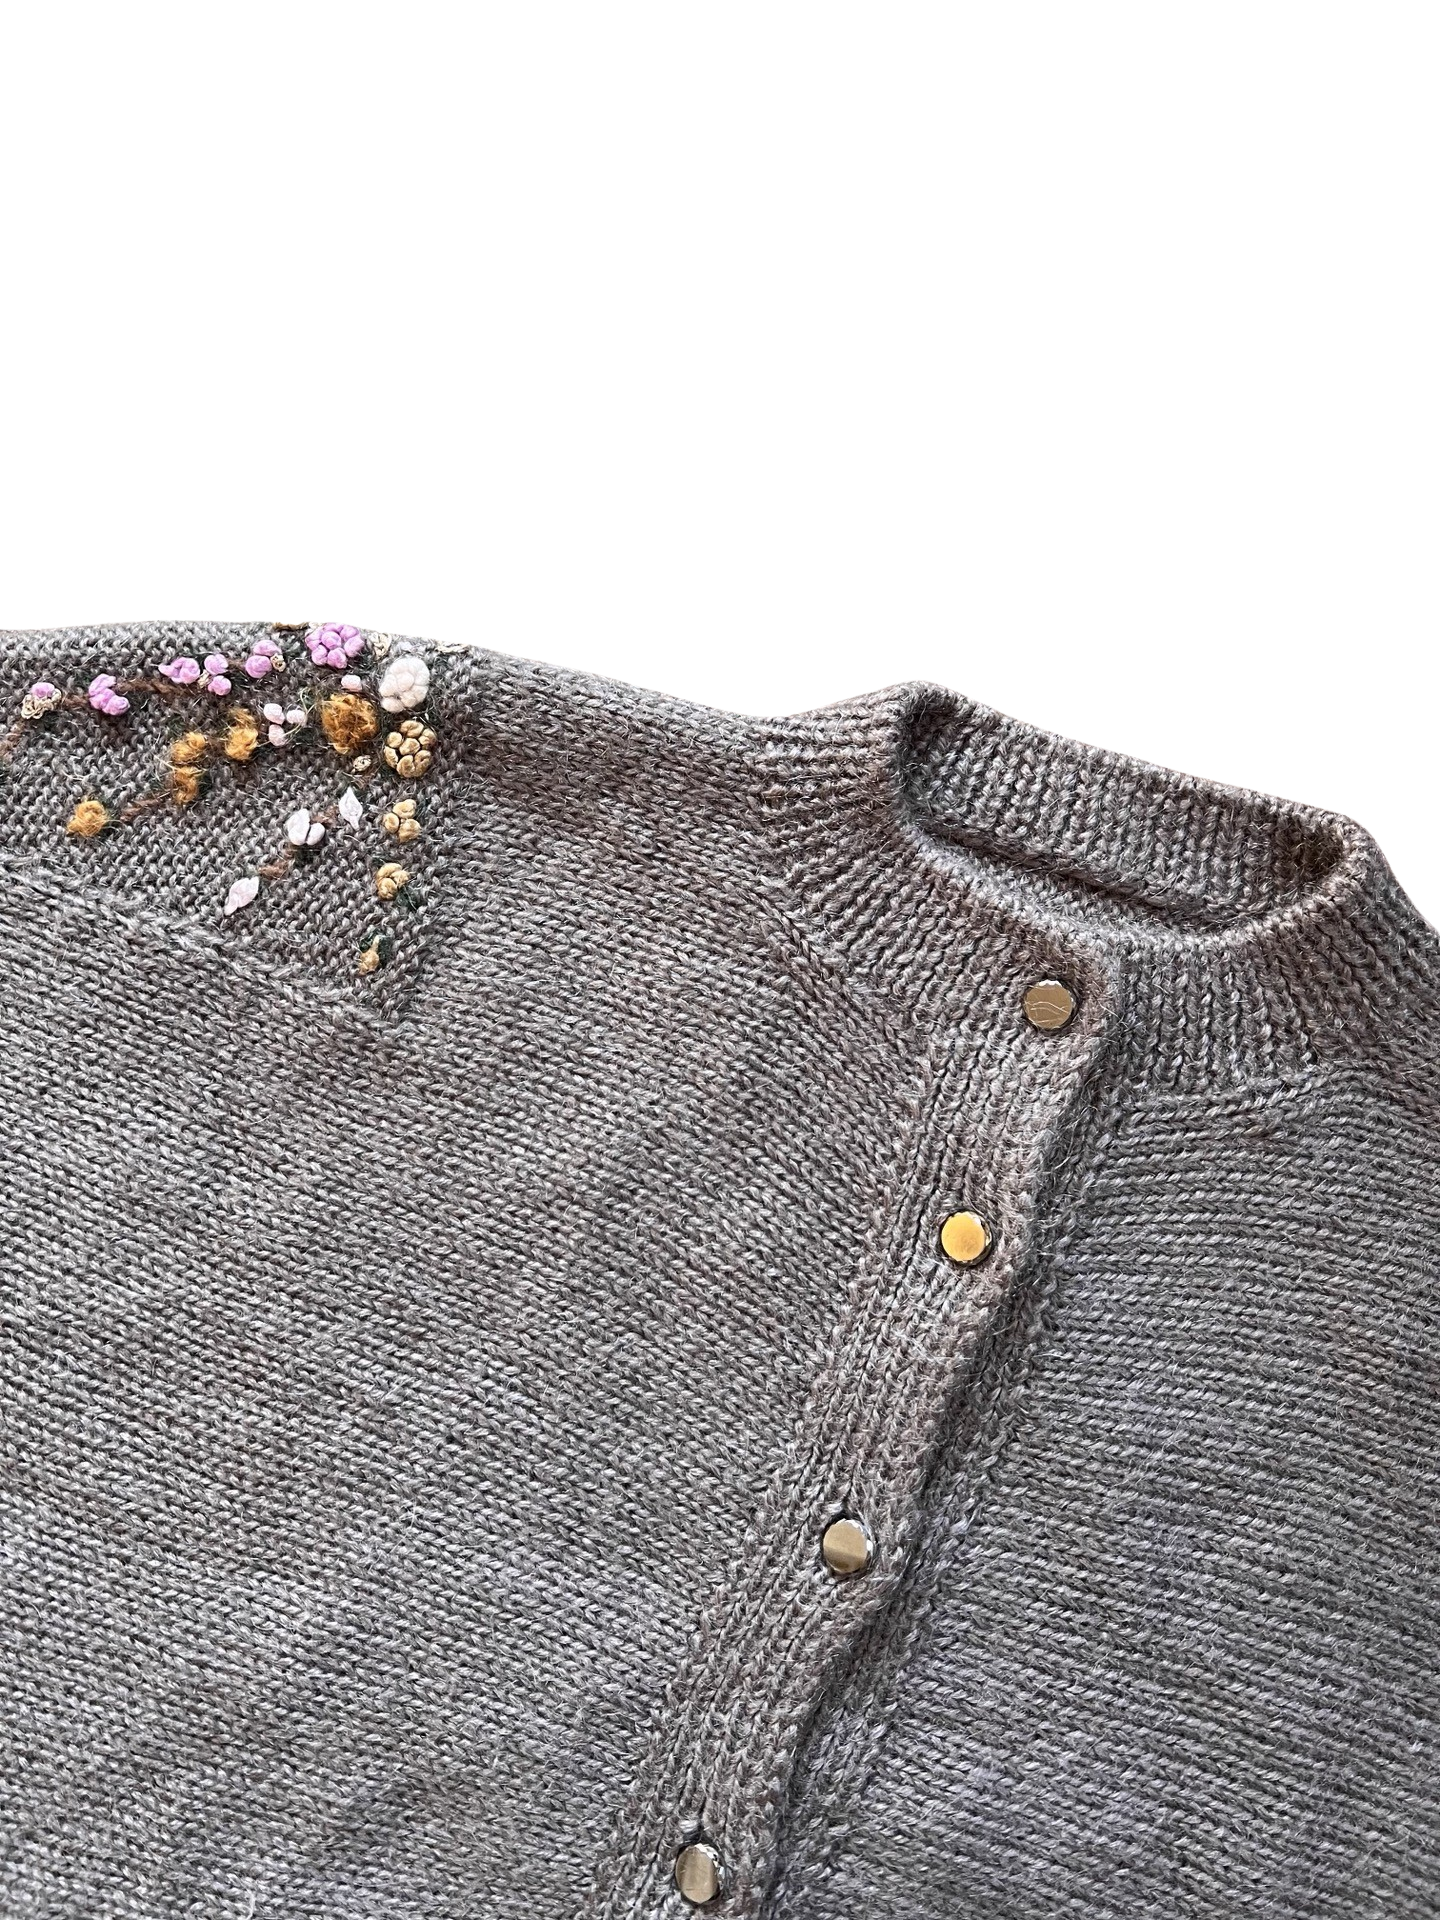 Embroidered Brown Cardigan